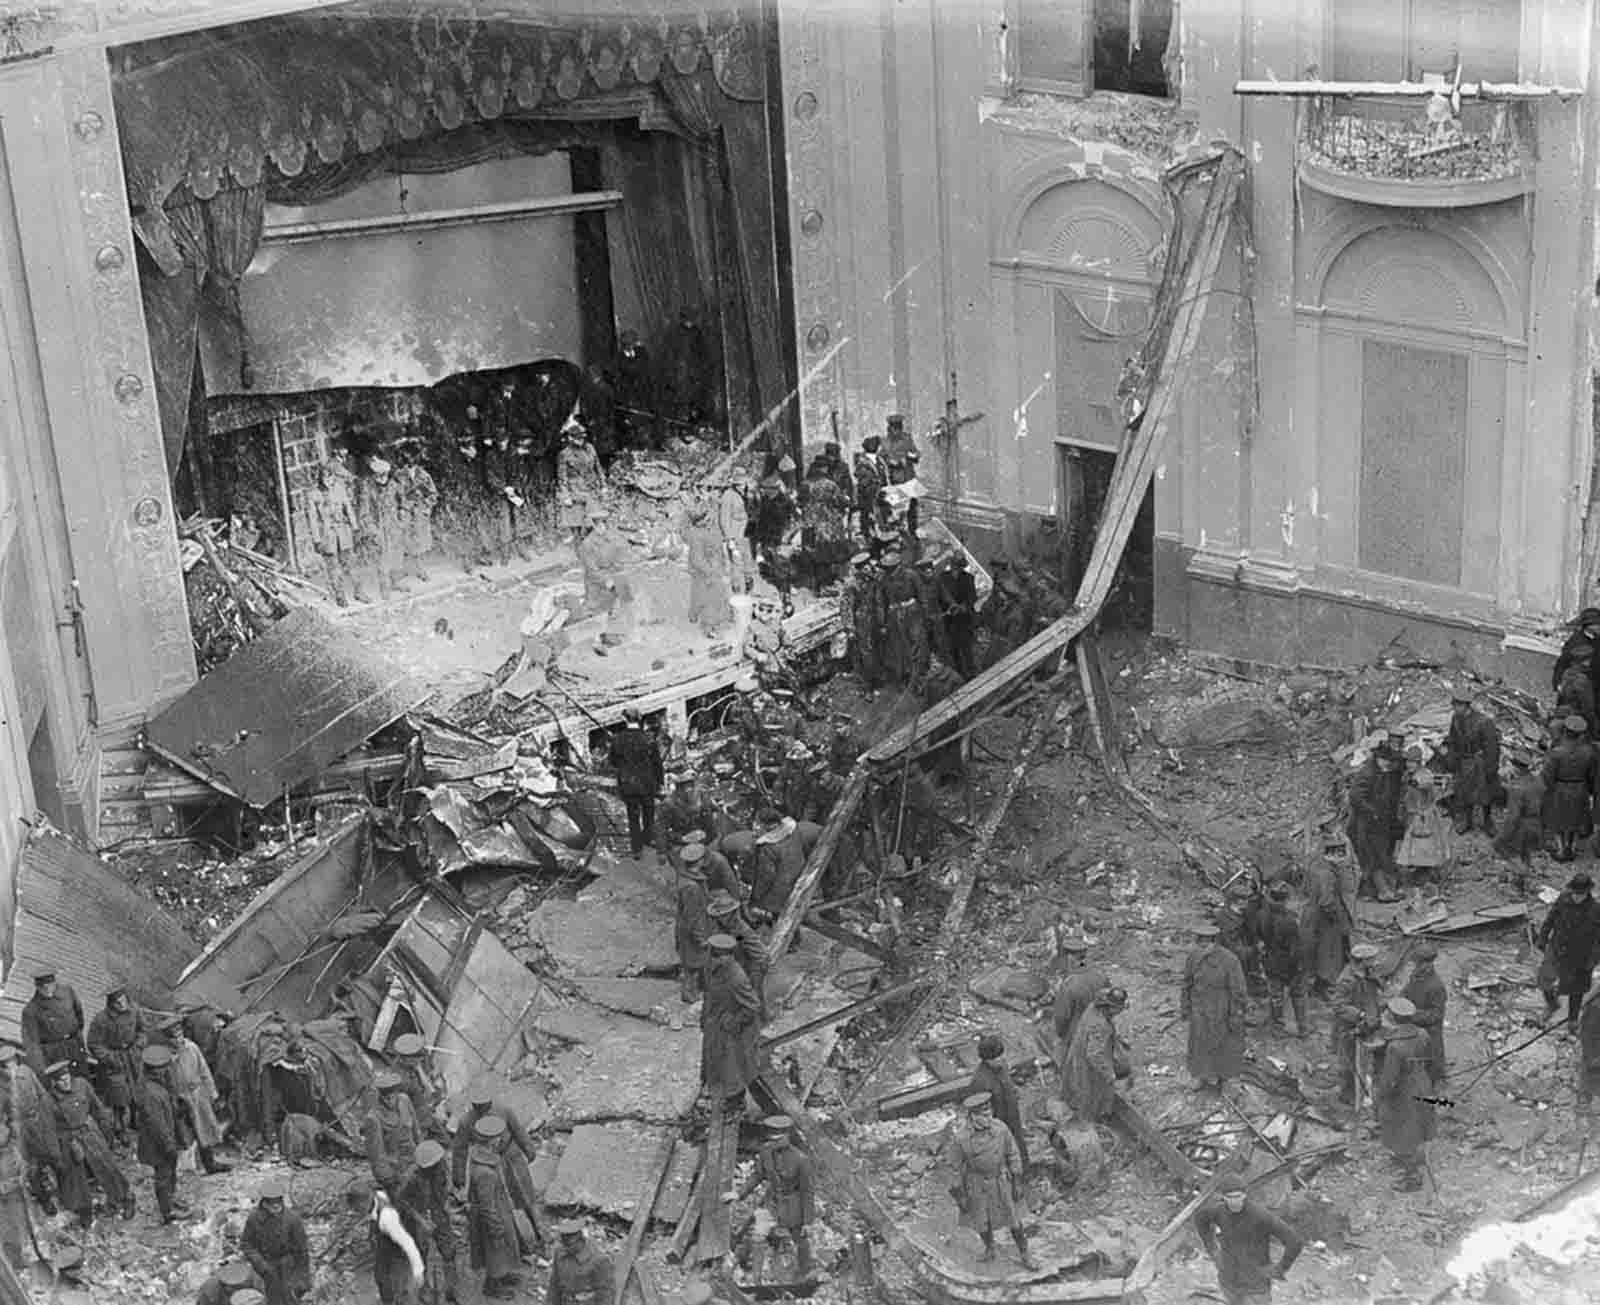 Police, soldiers, and rescue workers examine the ruins of the Knickerbocker Theatre.